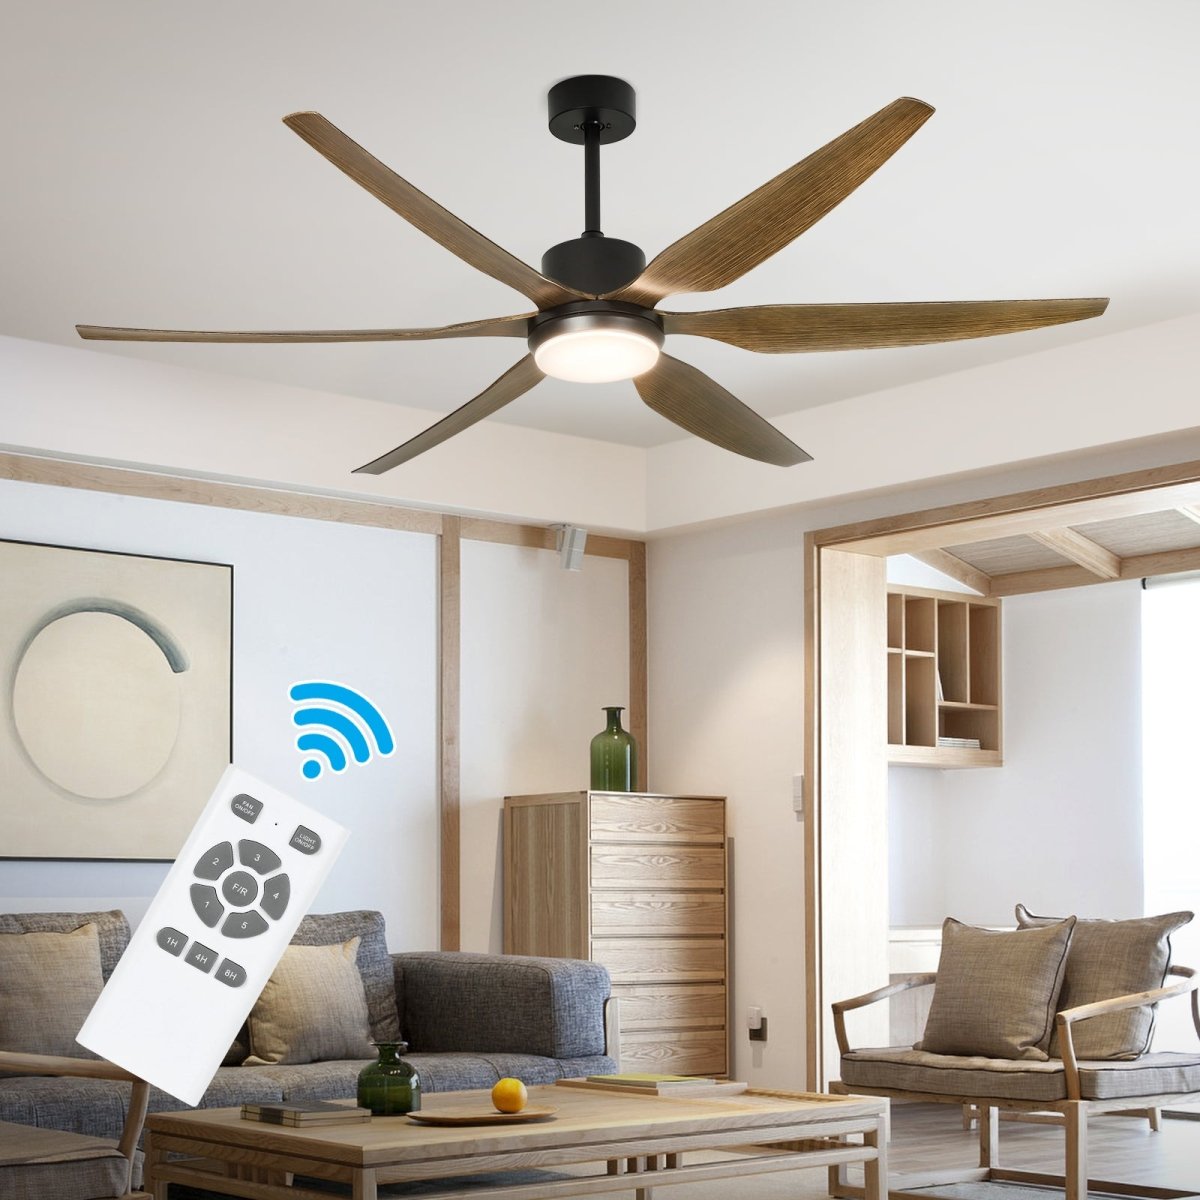 Depuley 66" Ceiling Fans with Lights Remote Control, Indoor Outdoor Black Ceiling Fan with 6 Blades, Dimmable Modern Room Fan for Patio Living Room, Summer House, Office, Reversible Quiet DC Motor - WS-FPZ32-12B 1 | DEPULEY